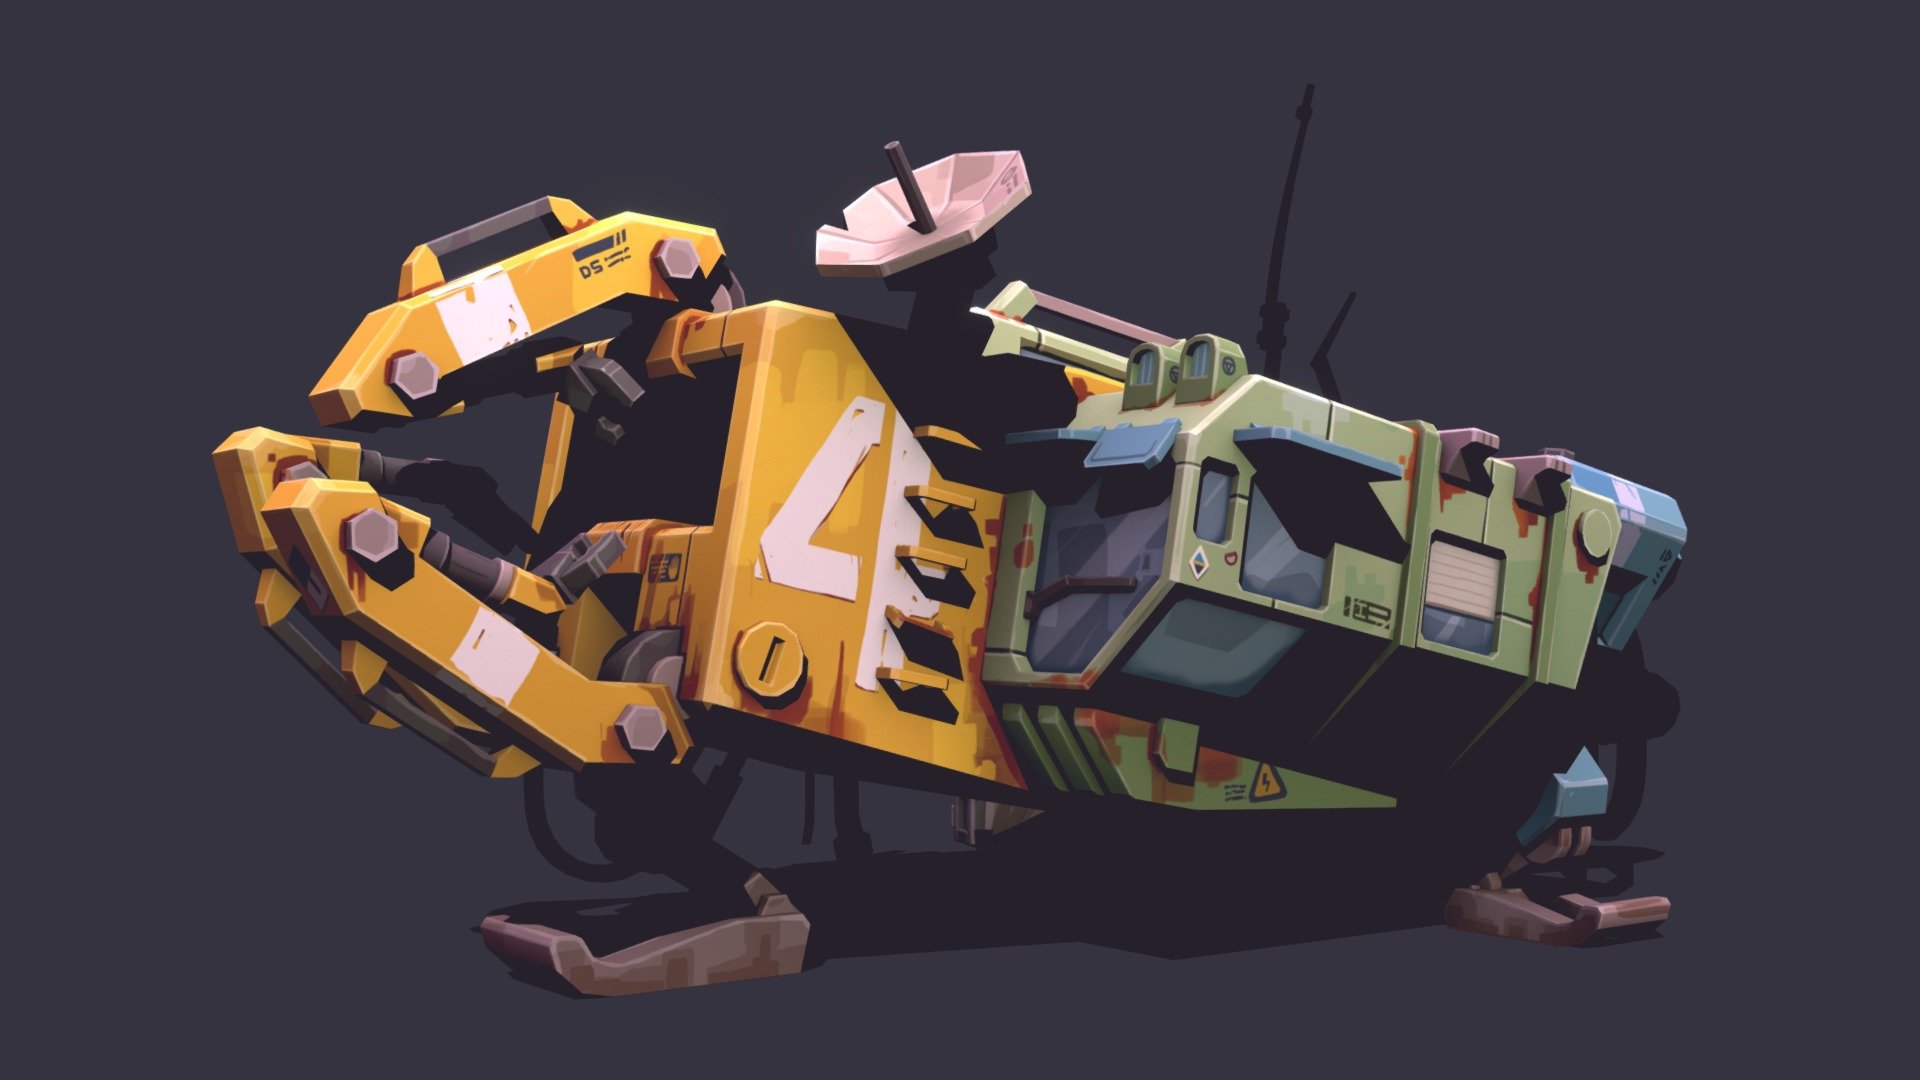 Space garbage collector. Made this model for a local community competiotion.
Inspired by Blackbird Interactive Homeworld: Deserts of Kharak concepts and Hamish Frater art (check it out - it's amazing) - Garbage collector - 3D model by Alex Pushilin (@plannit) 3d model